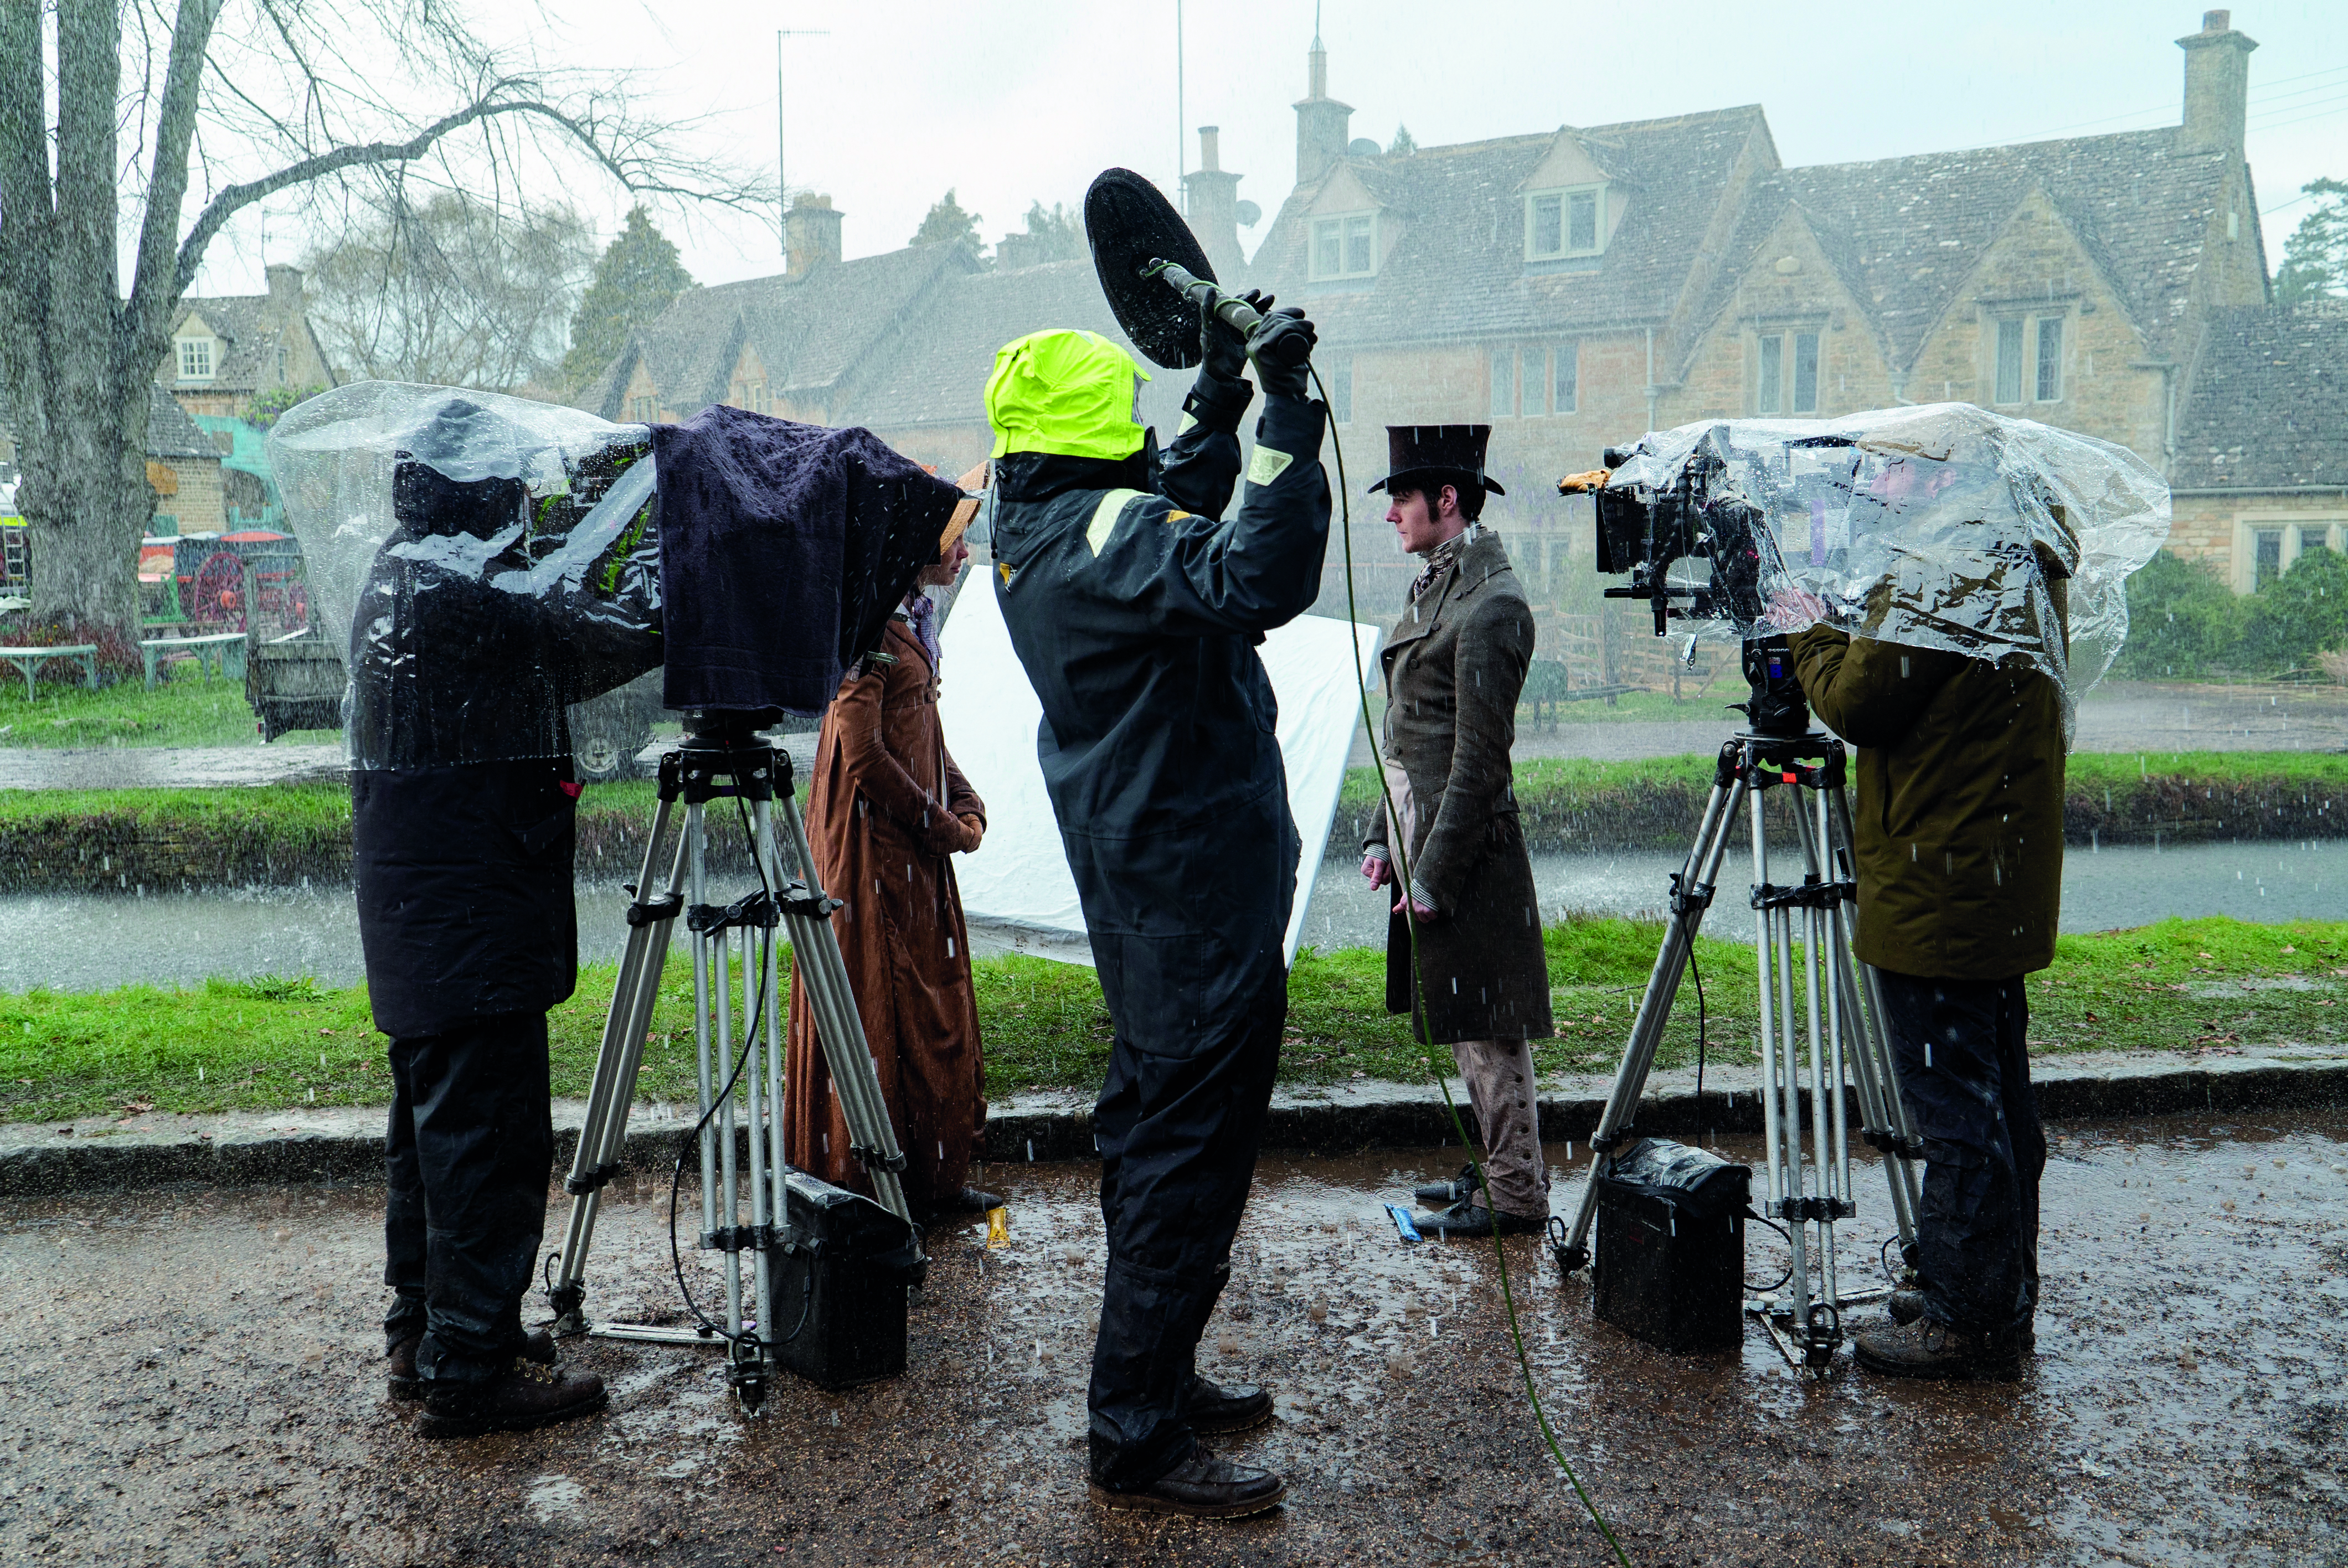 Filming in Lower Slaughter